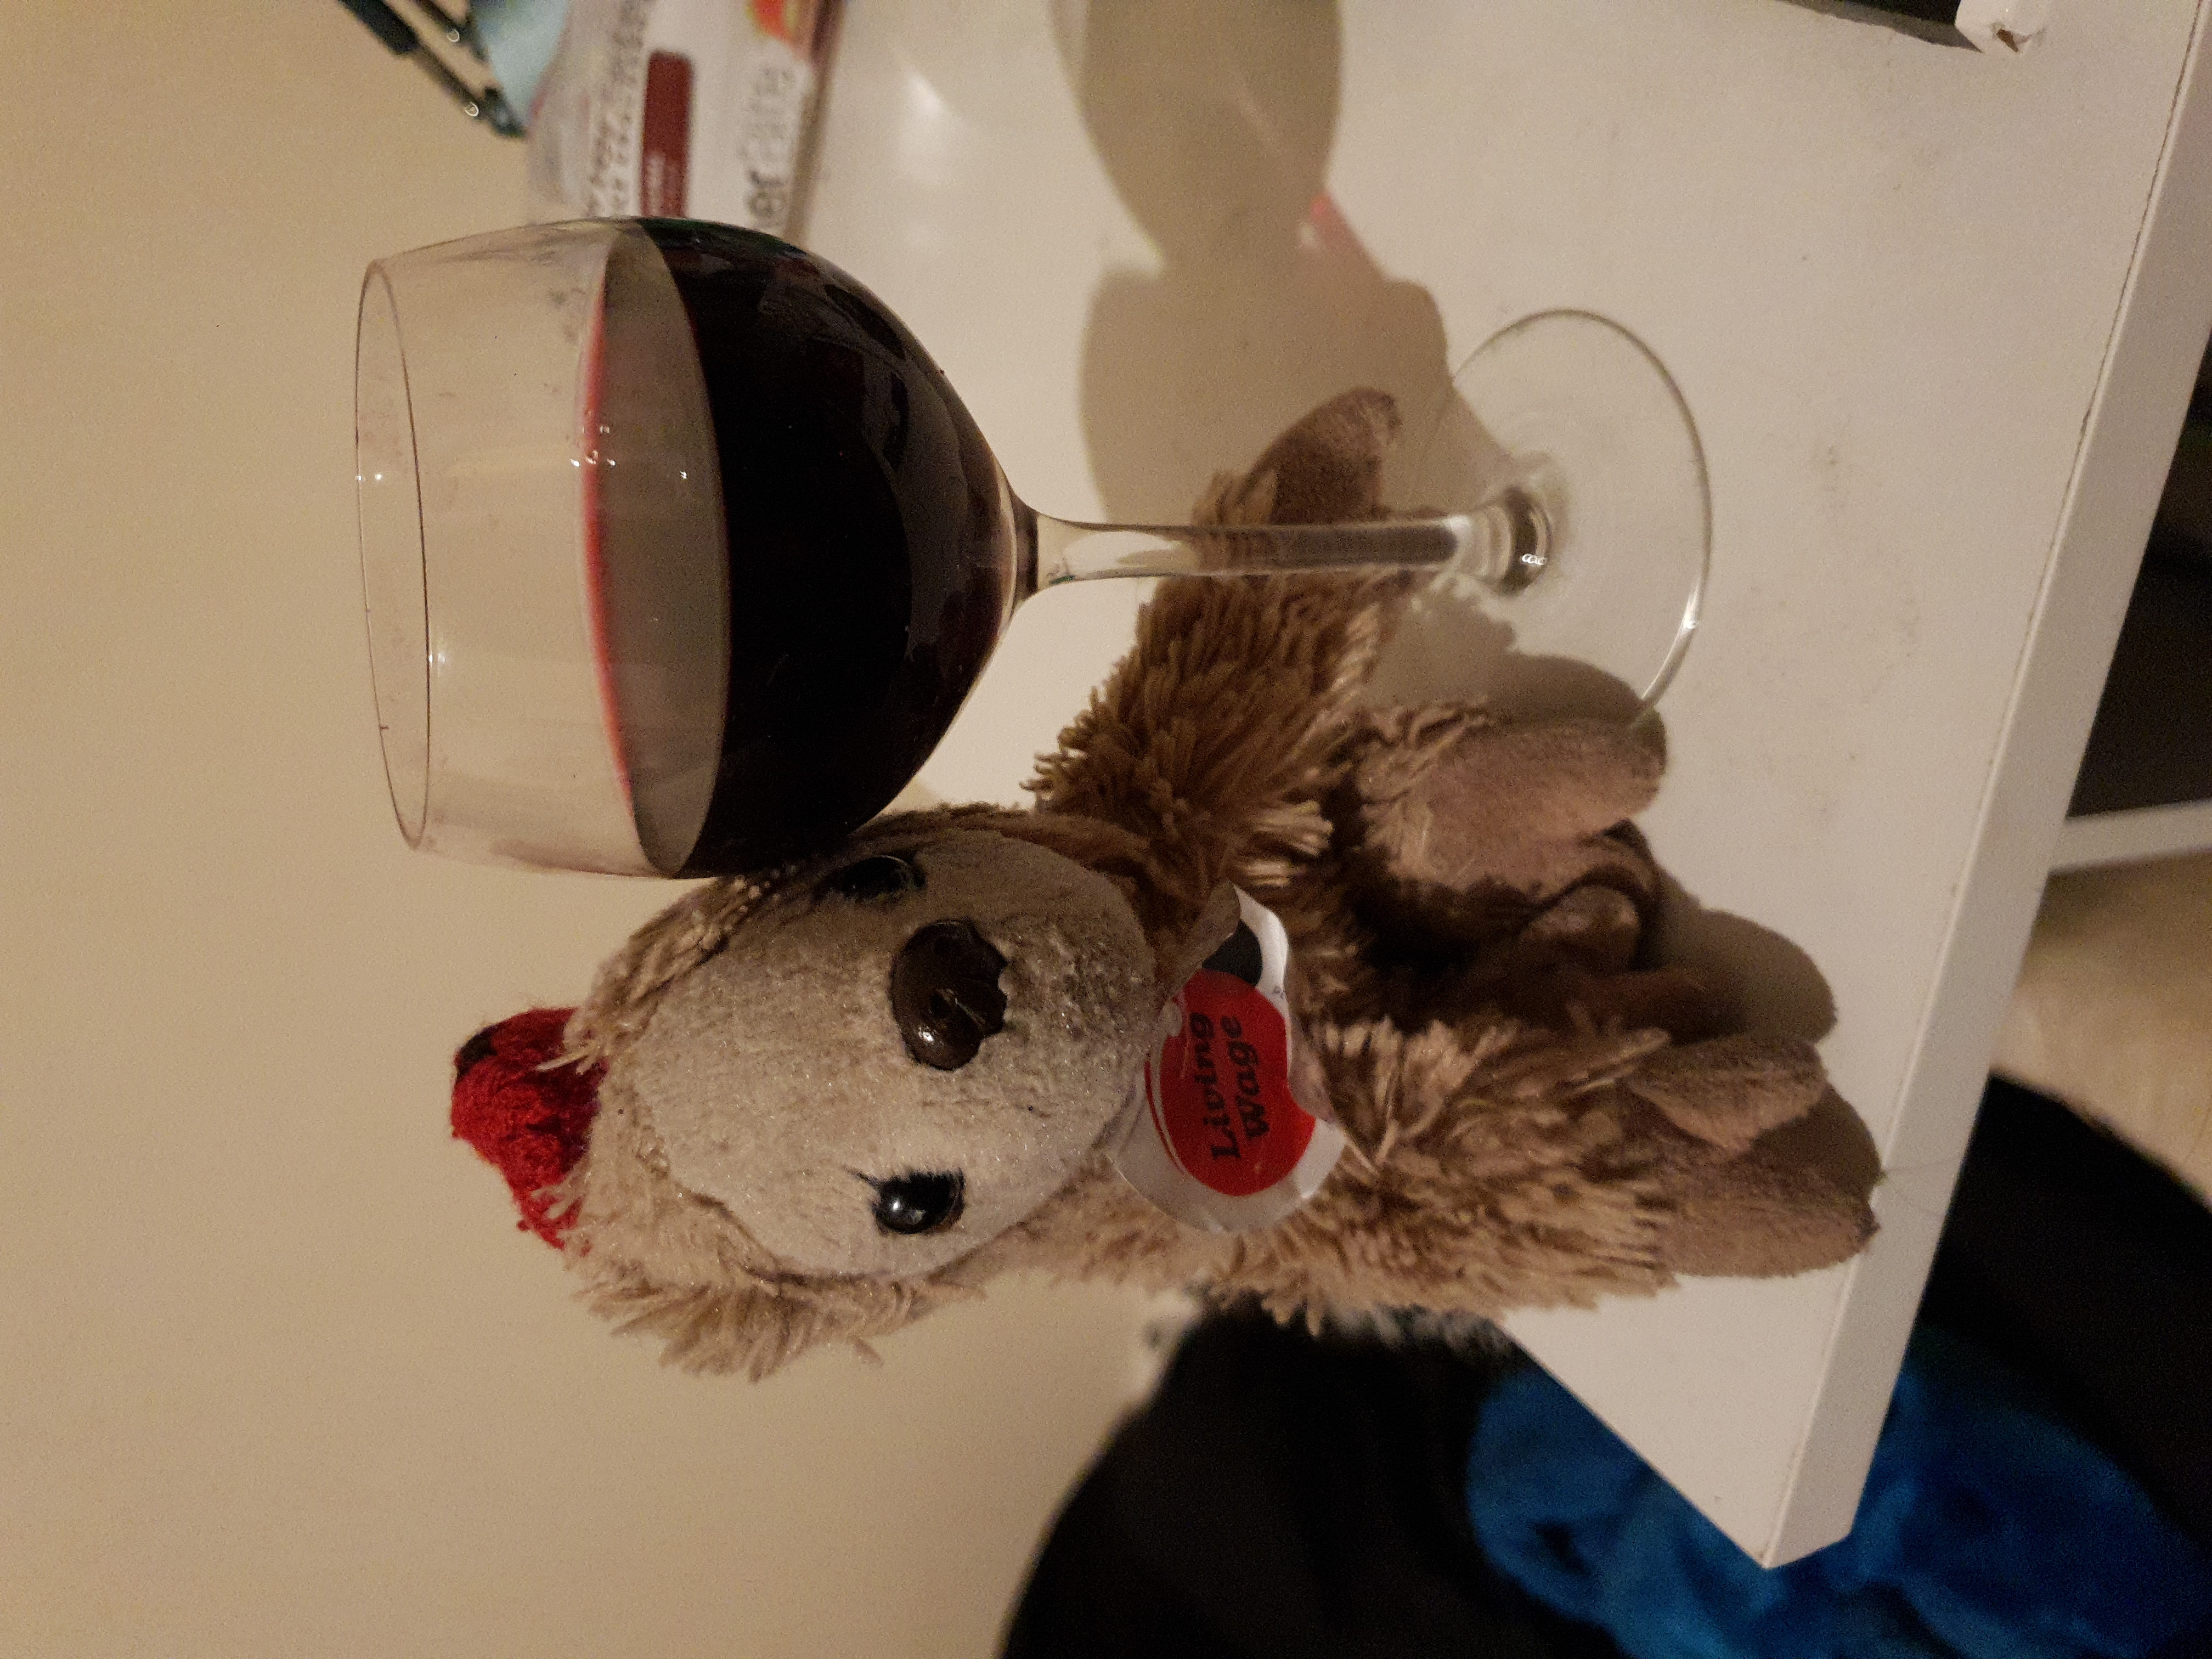 Comrade snuggleton, a soft toy sloth, with a large glass of red wine